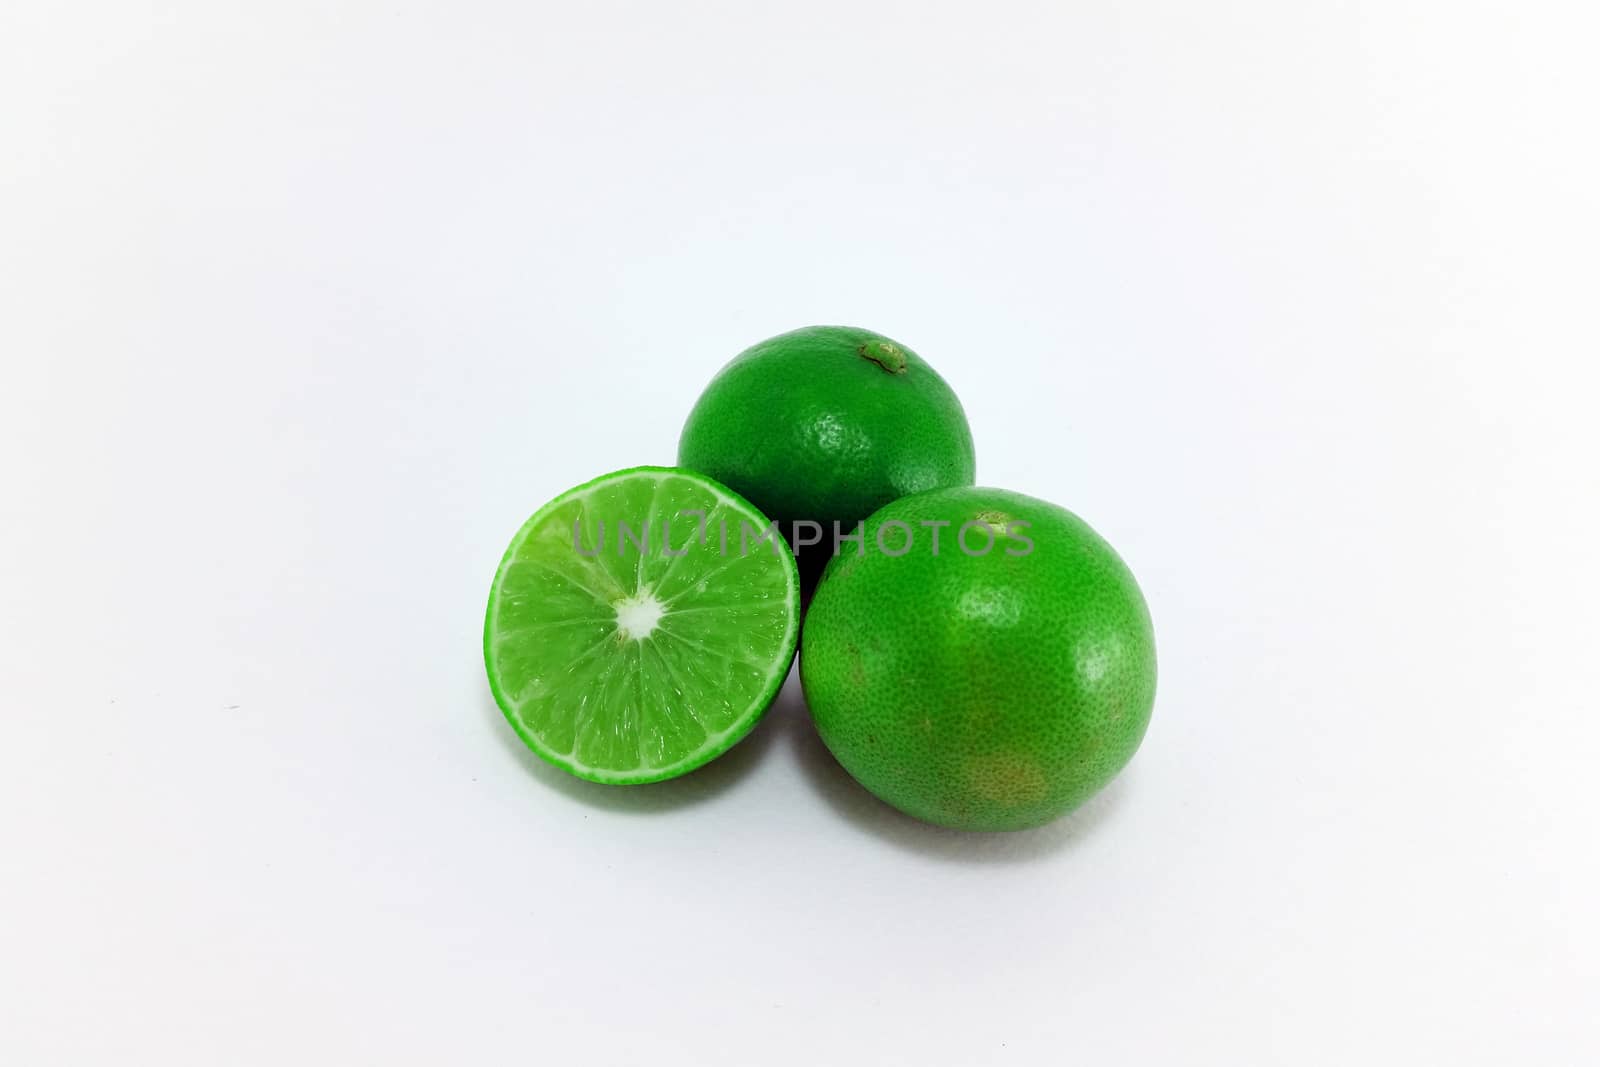 a group of 2 and a half limes on white background